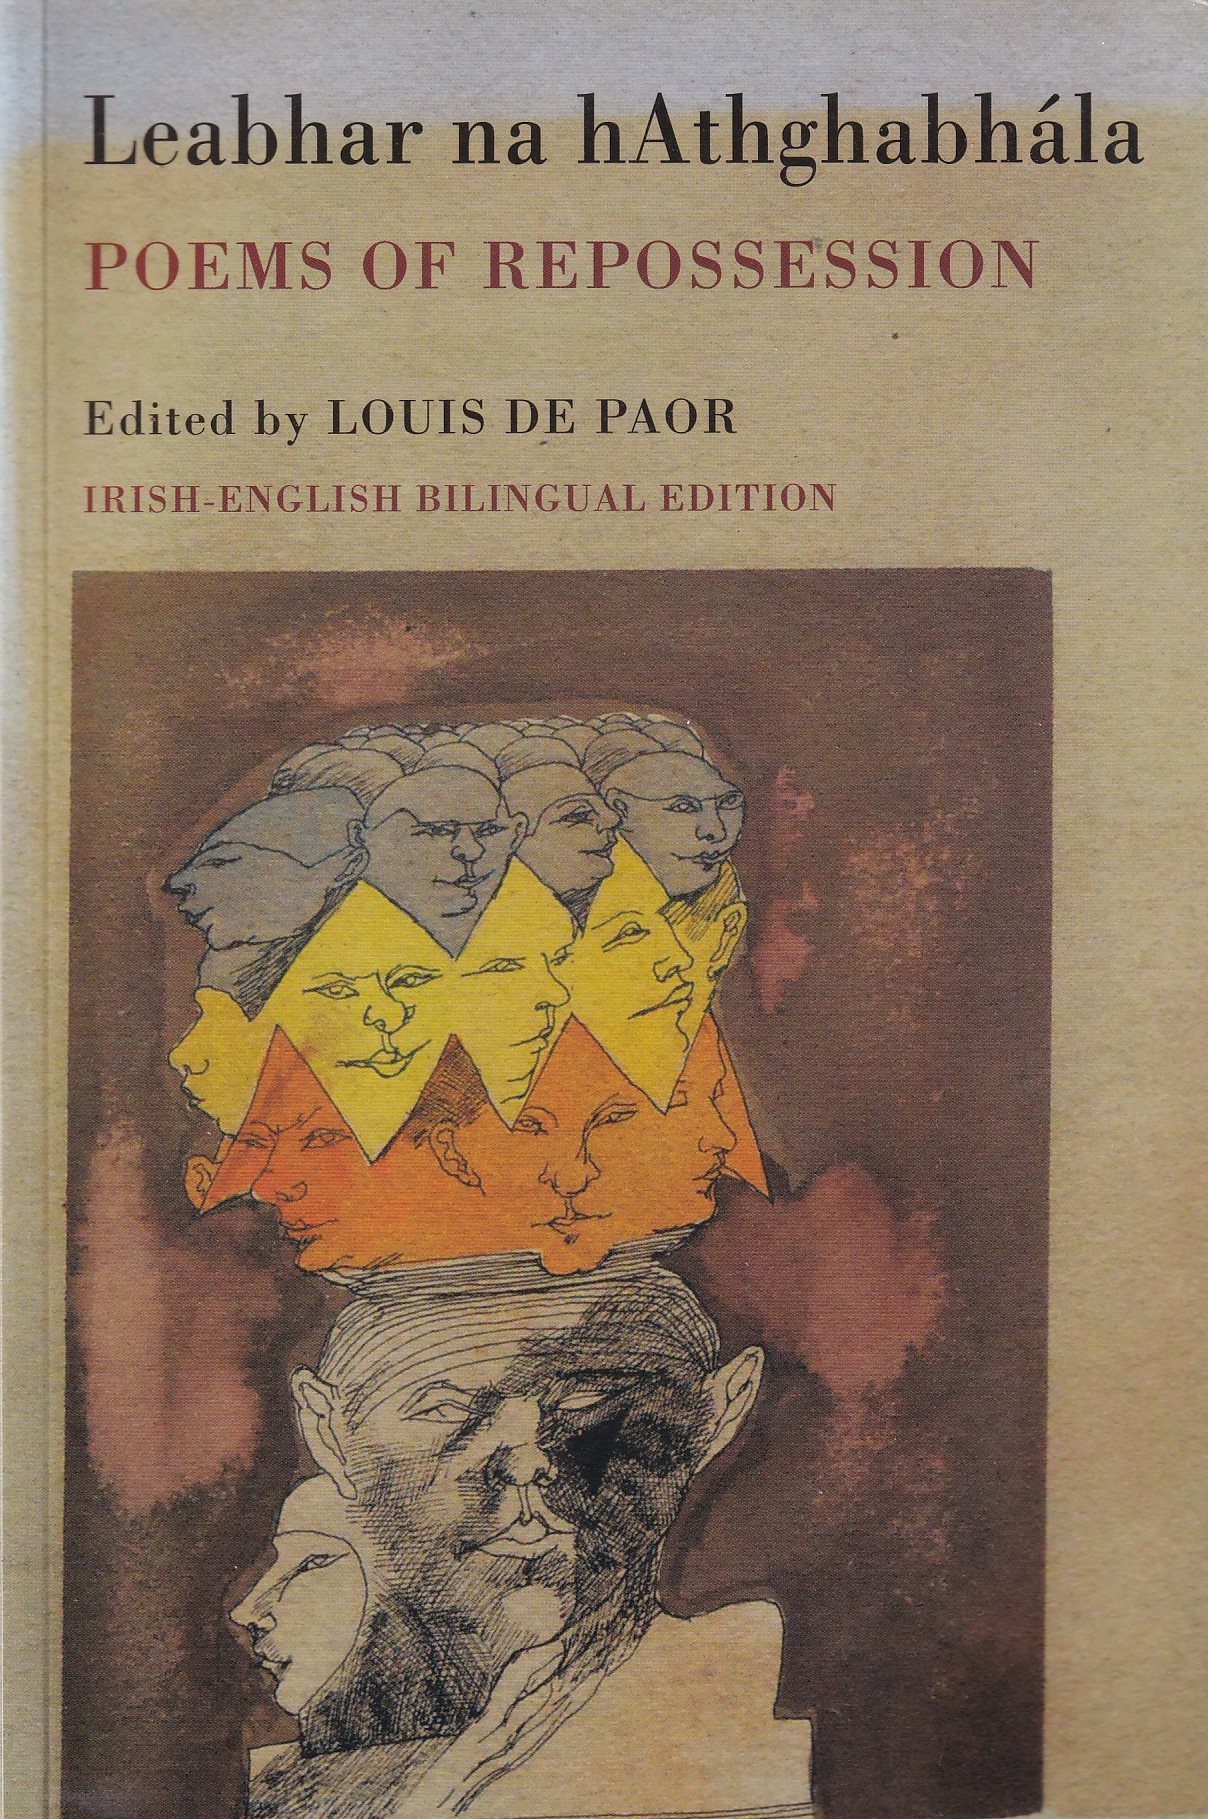 Leabhar na hAthghabhála: Poems of Repossession (Bilingual edition) by De Paor, Louis